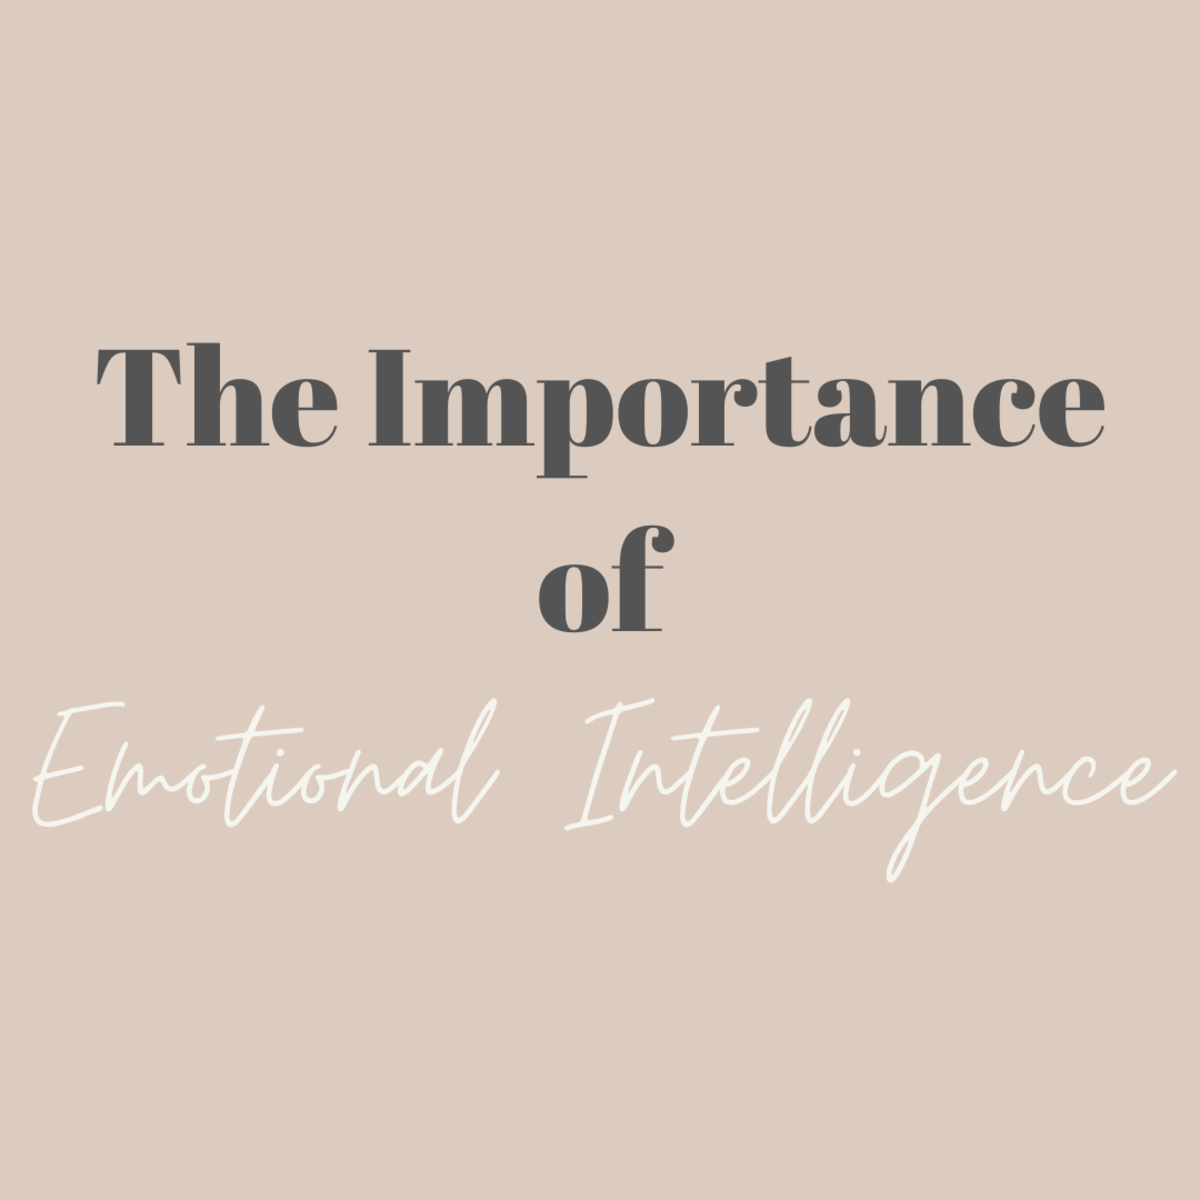 Leading Teams: The Importance of Emotional Intelligence